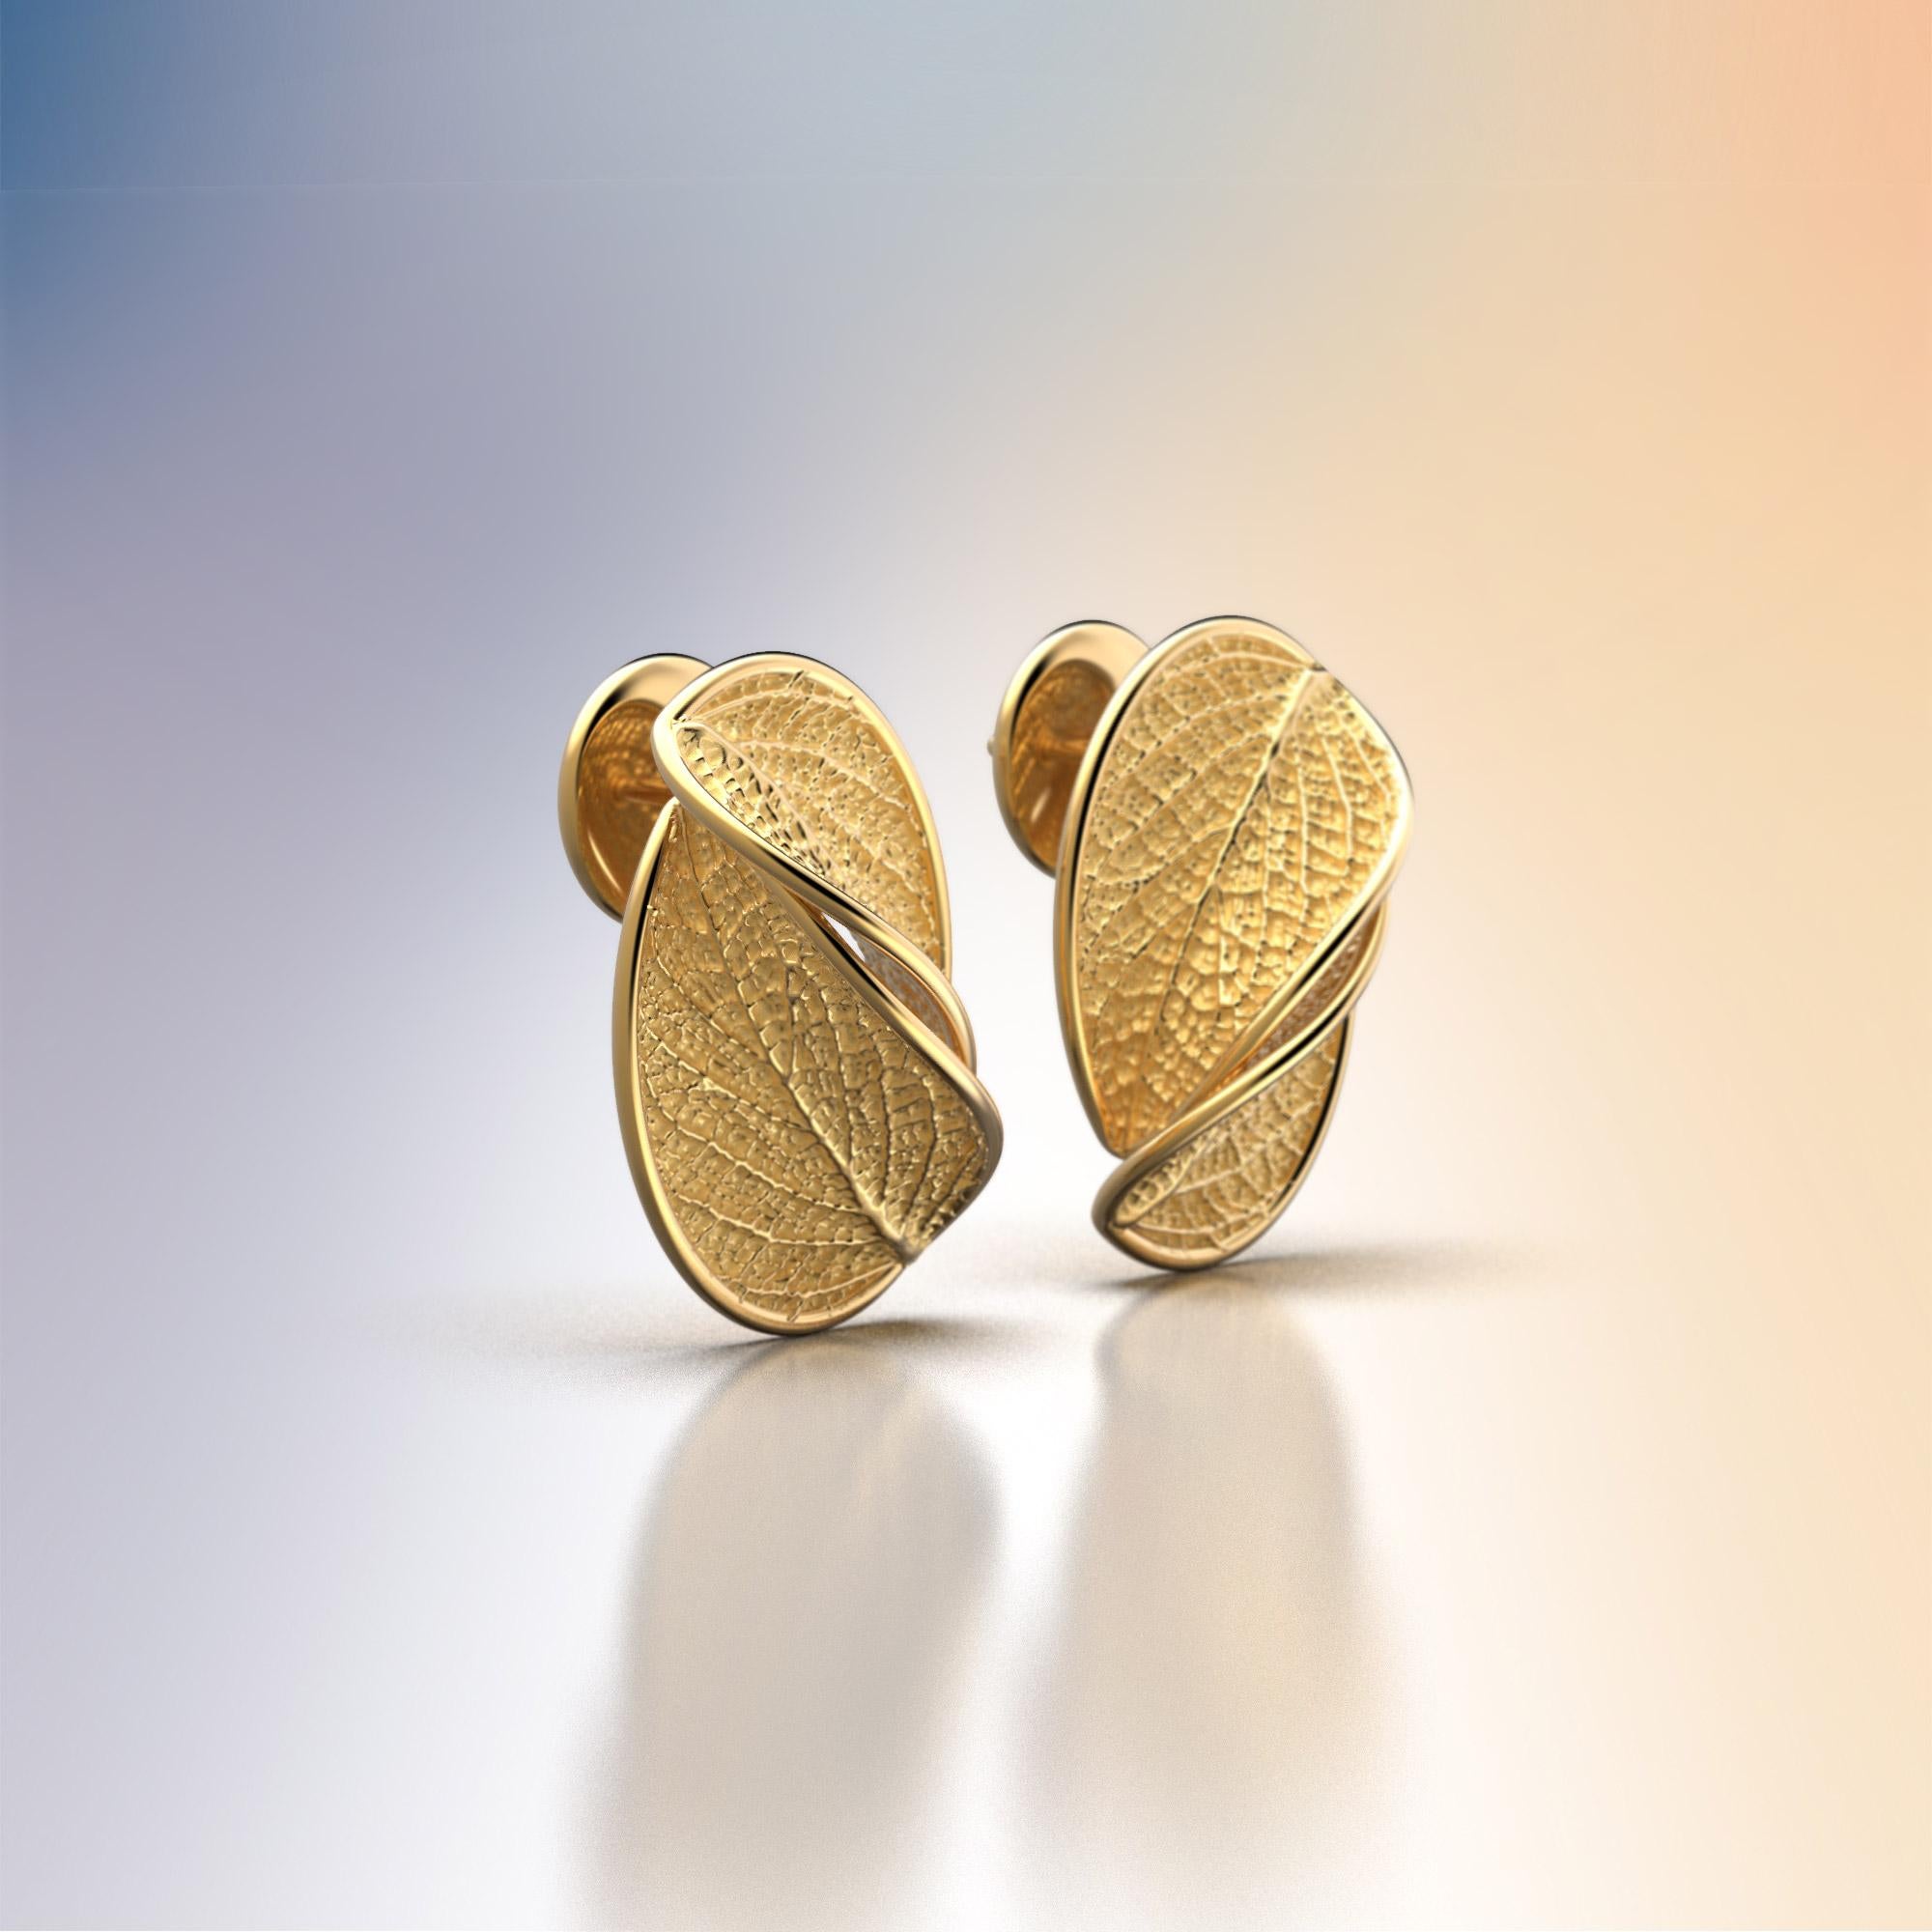 Brilliant Cut 14k Gold Nature Inspired Stud Earrings with Leaf Design, Italian Fine Jewelry For Sale